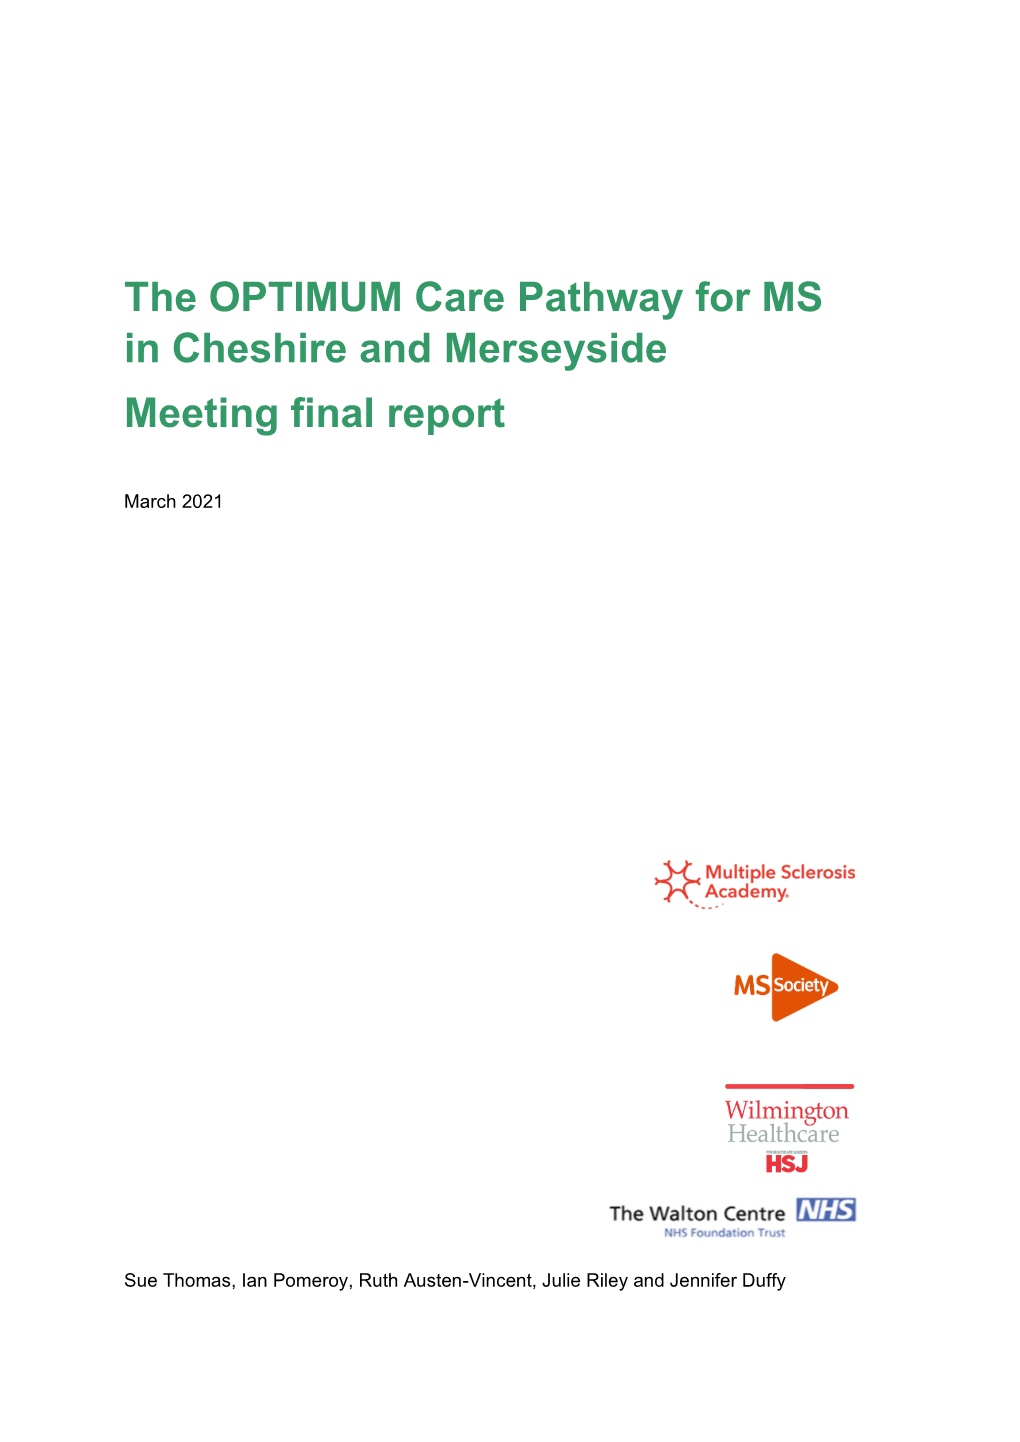 The OPTIMUM Care Pathway for MS in Cheshire and Merseyside Meeting Final Report